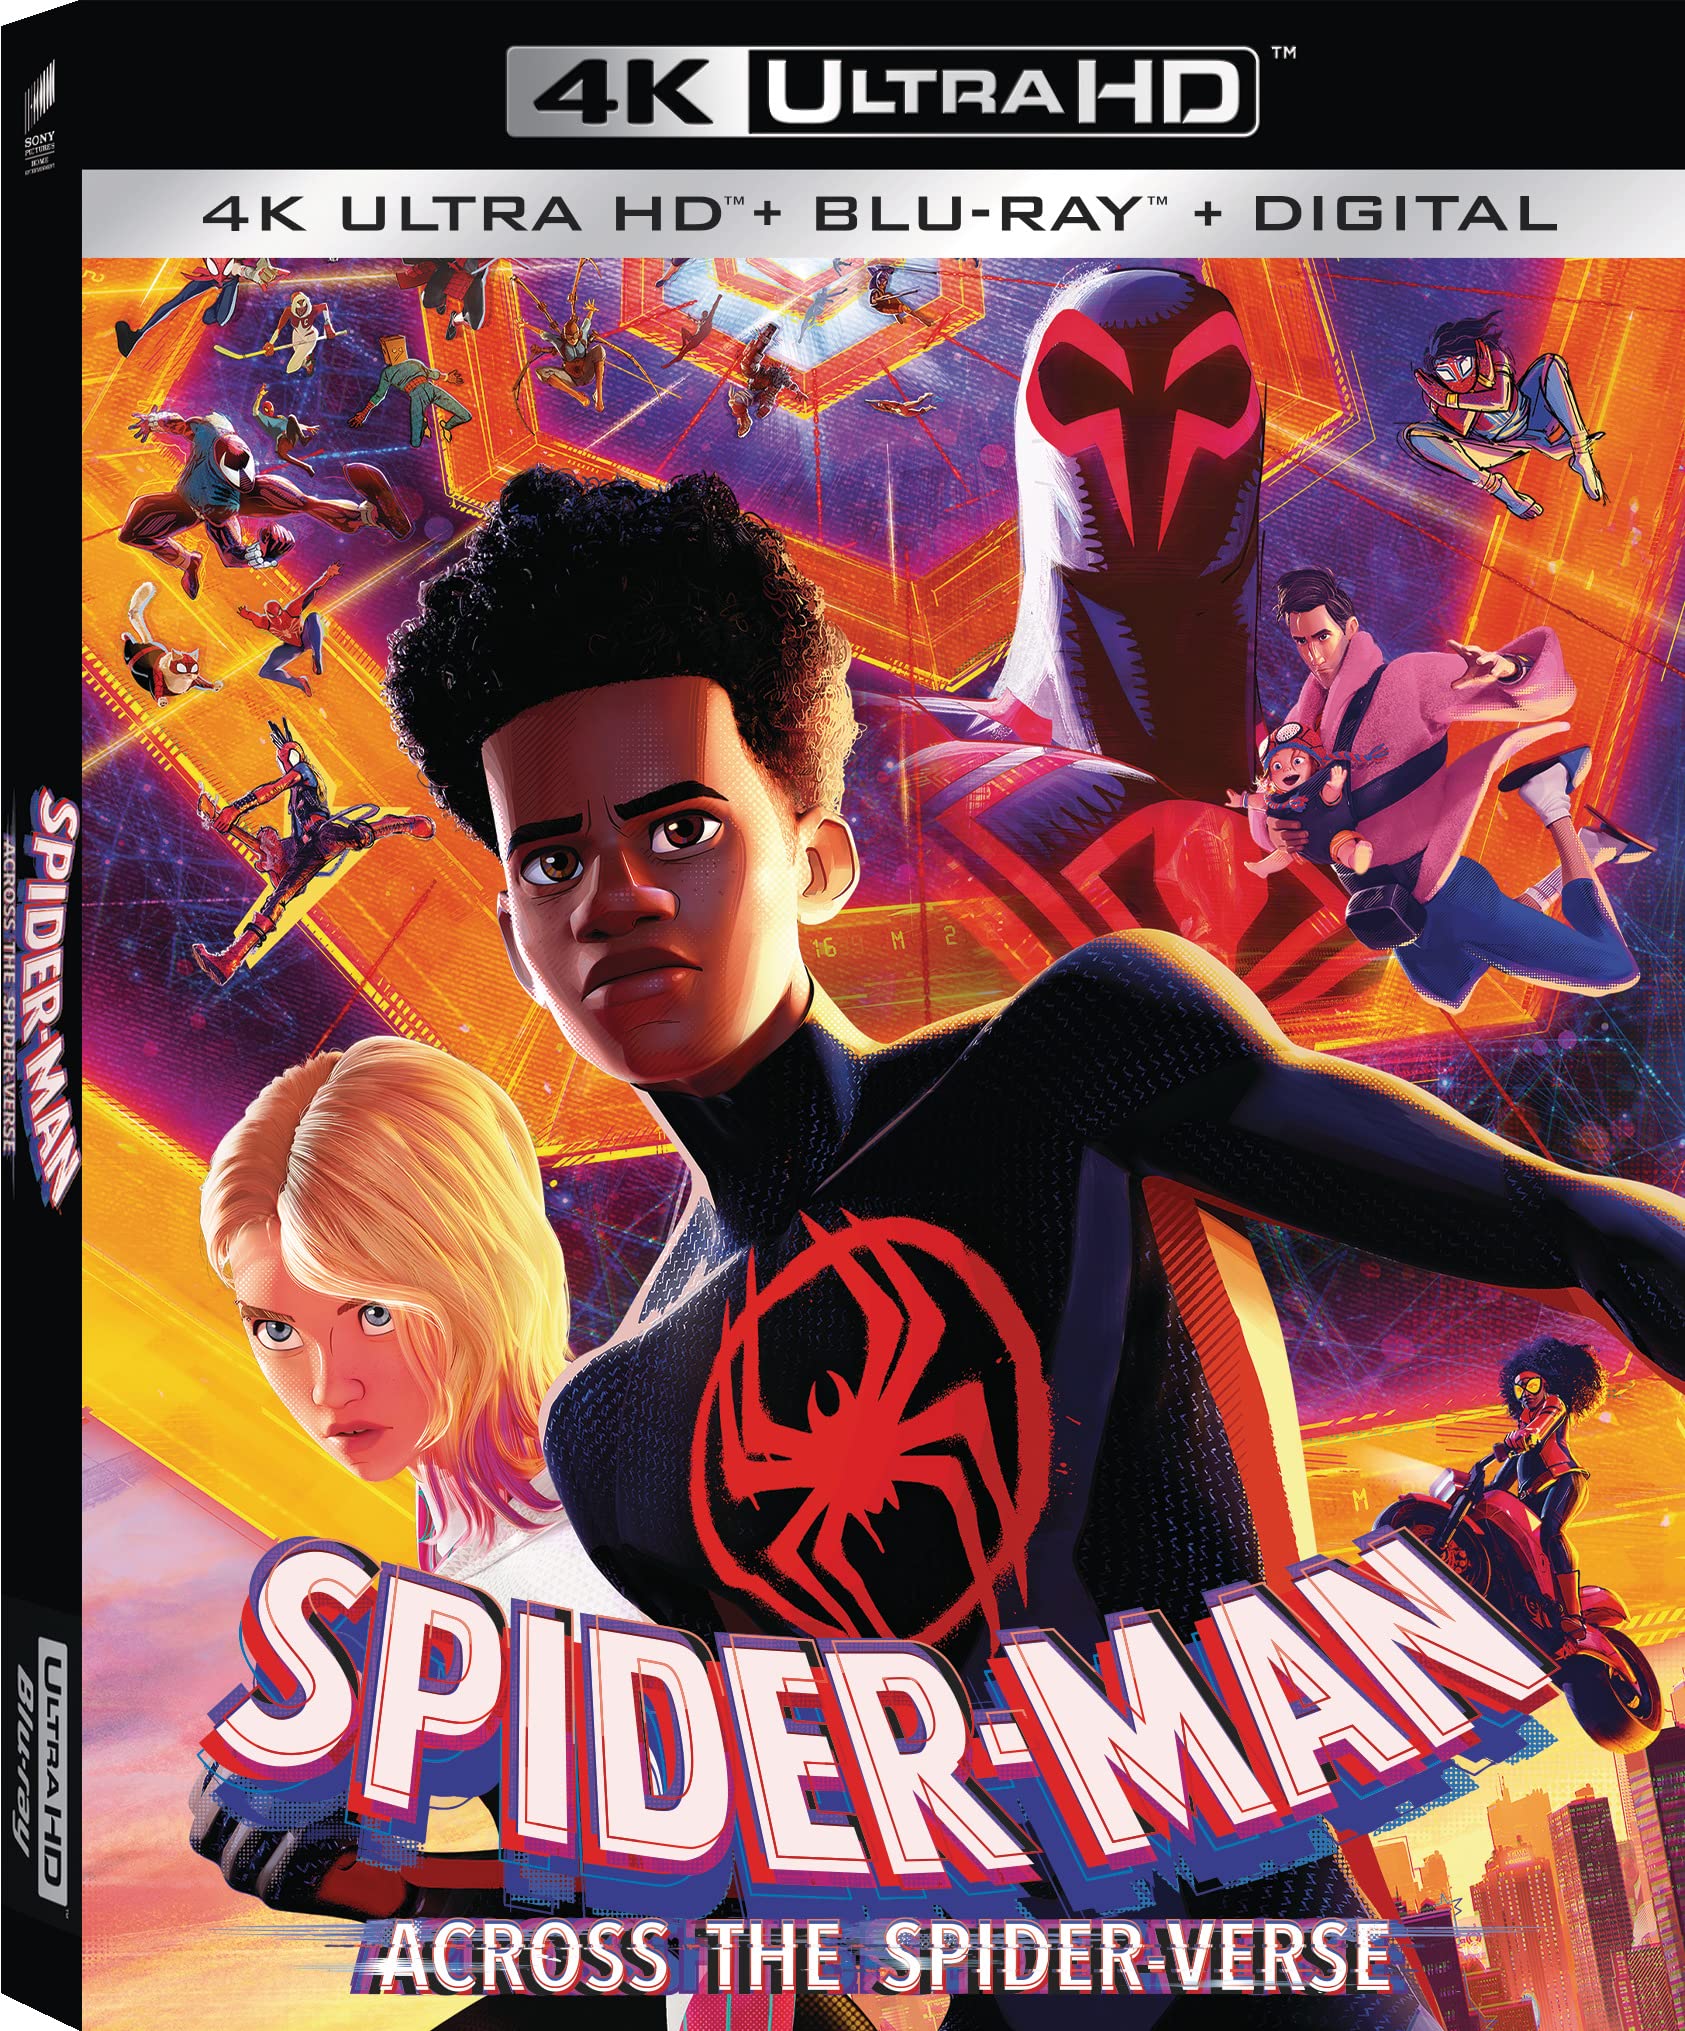 Spiderman Across The Spider-Verse movie 2023 poster (e) - Spiderman poster